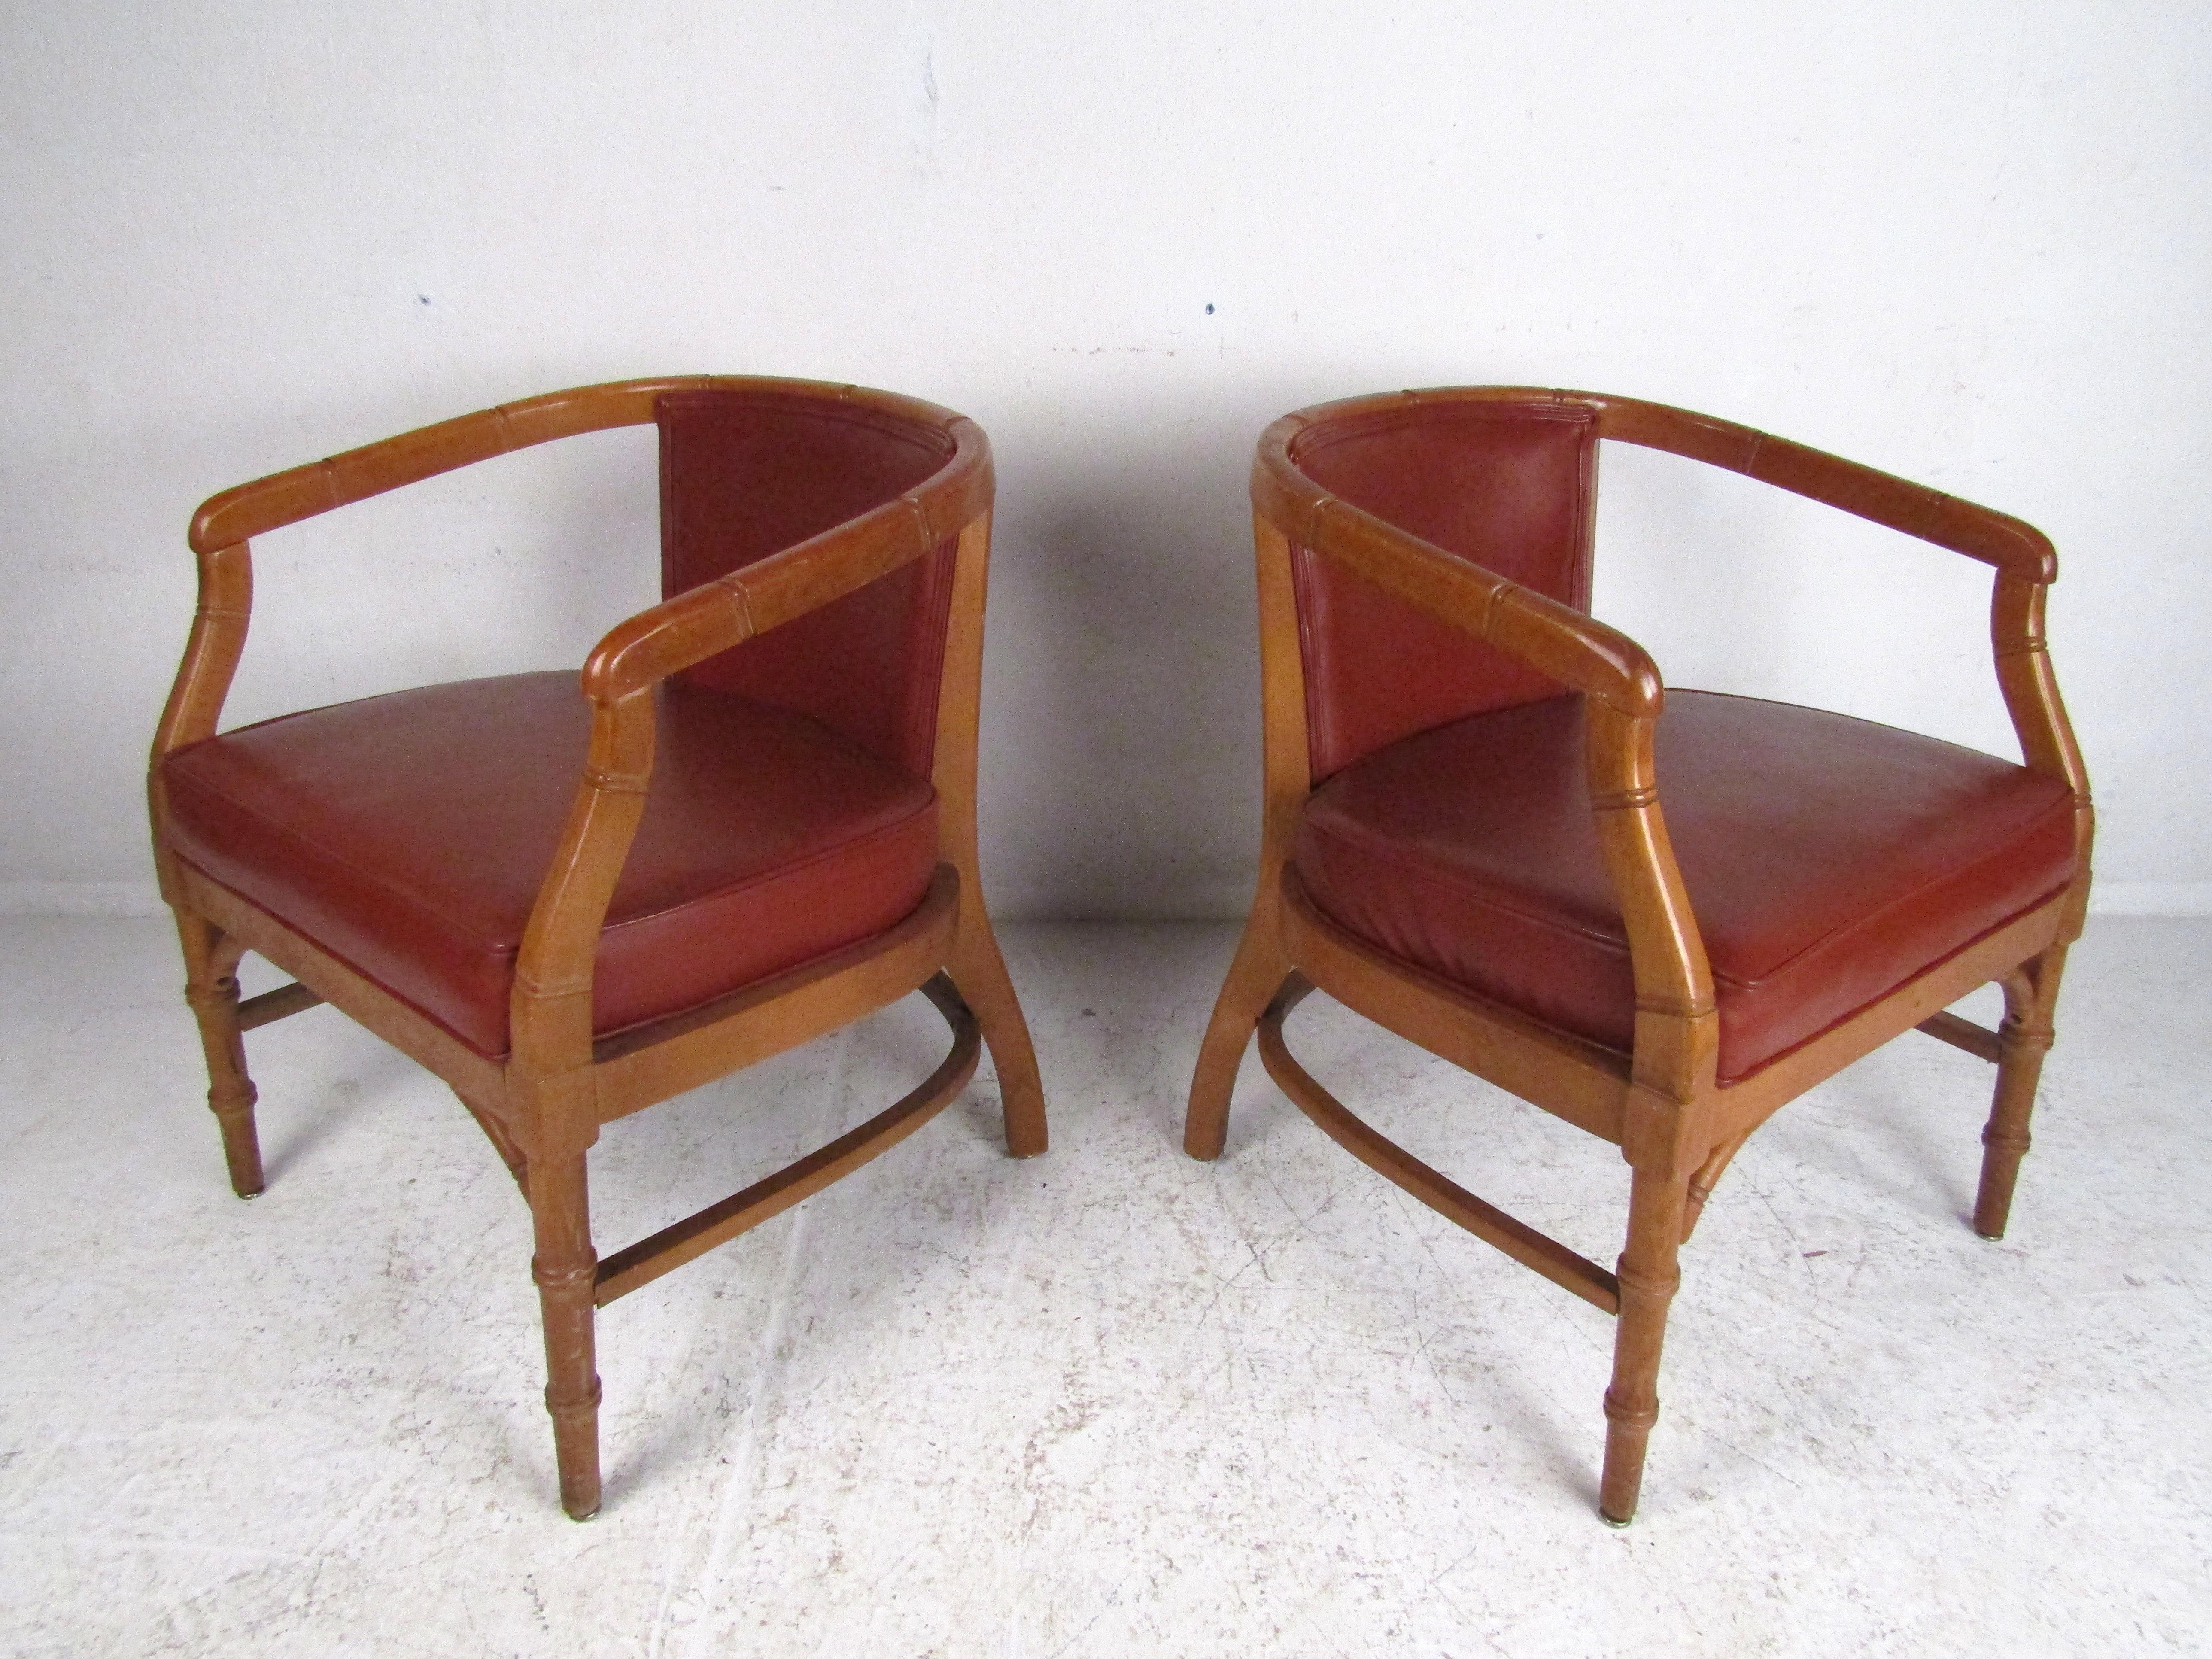 Pair of Mid-Century Modern Armchairs In Fair Condition For Sale In Brooklyn, NY